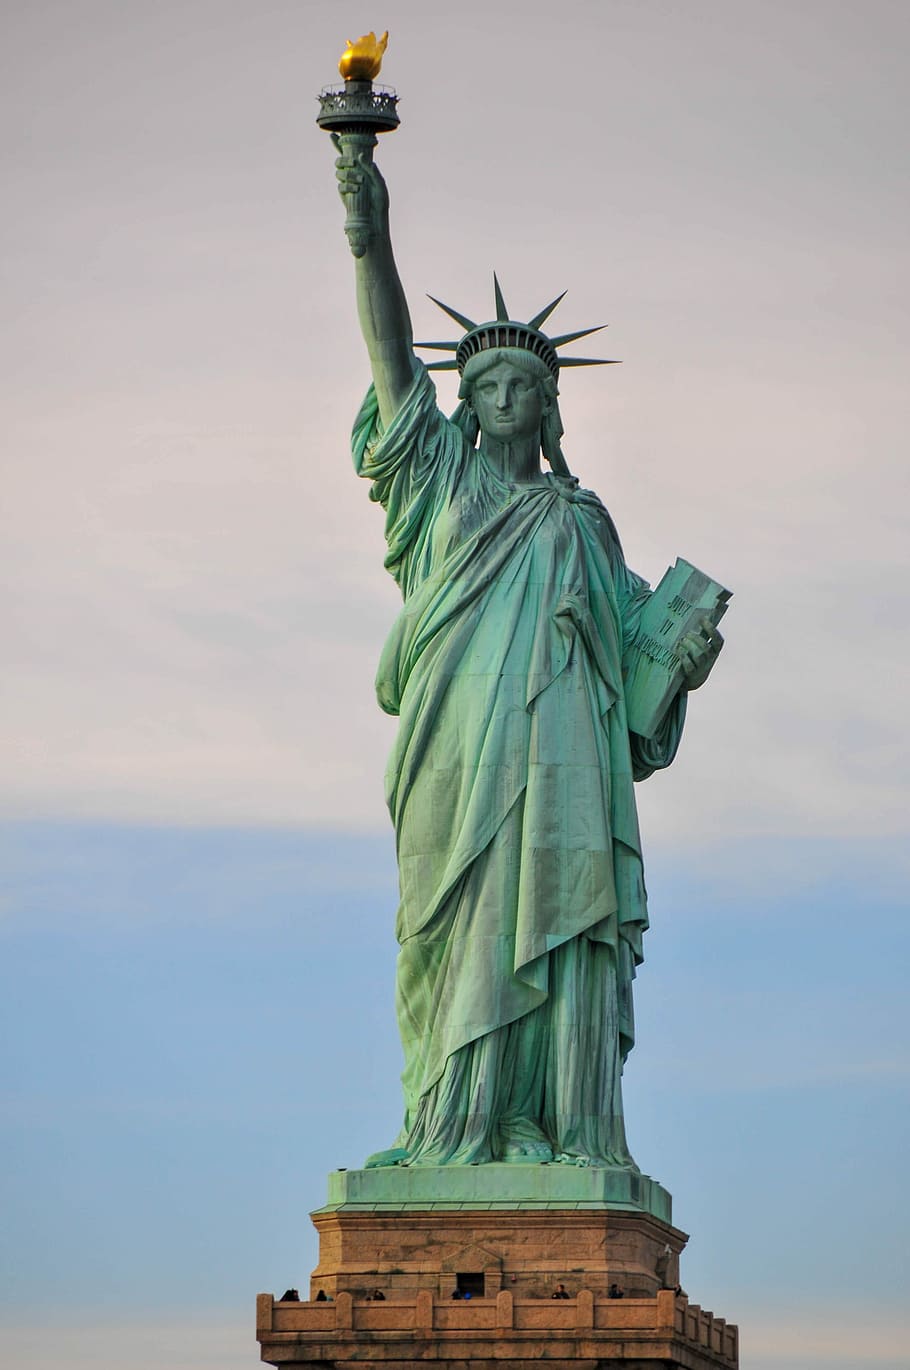 HQ The Statue Of Liberty Pictures  Download Free Images on Unsplash